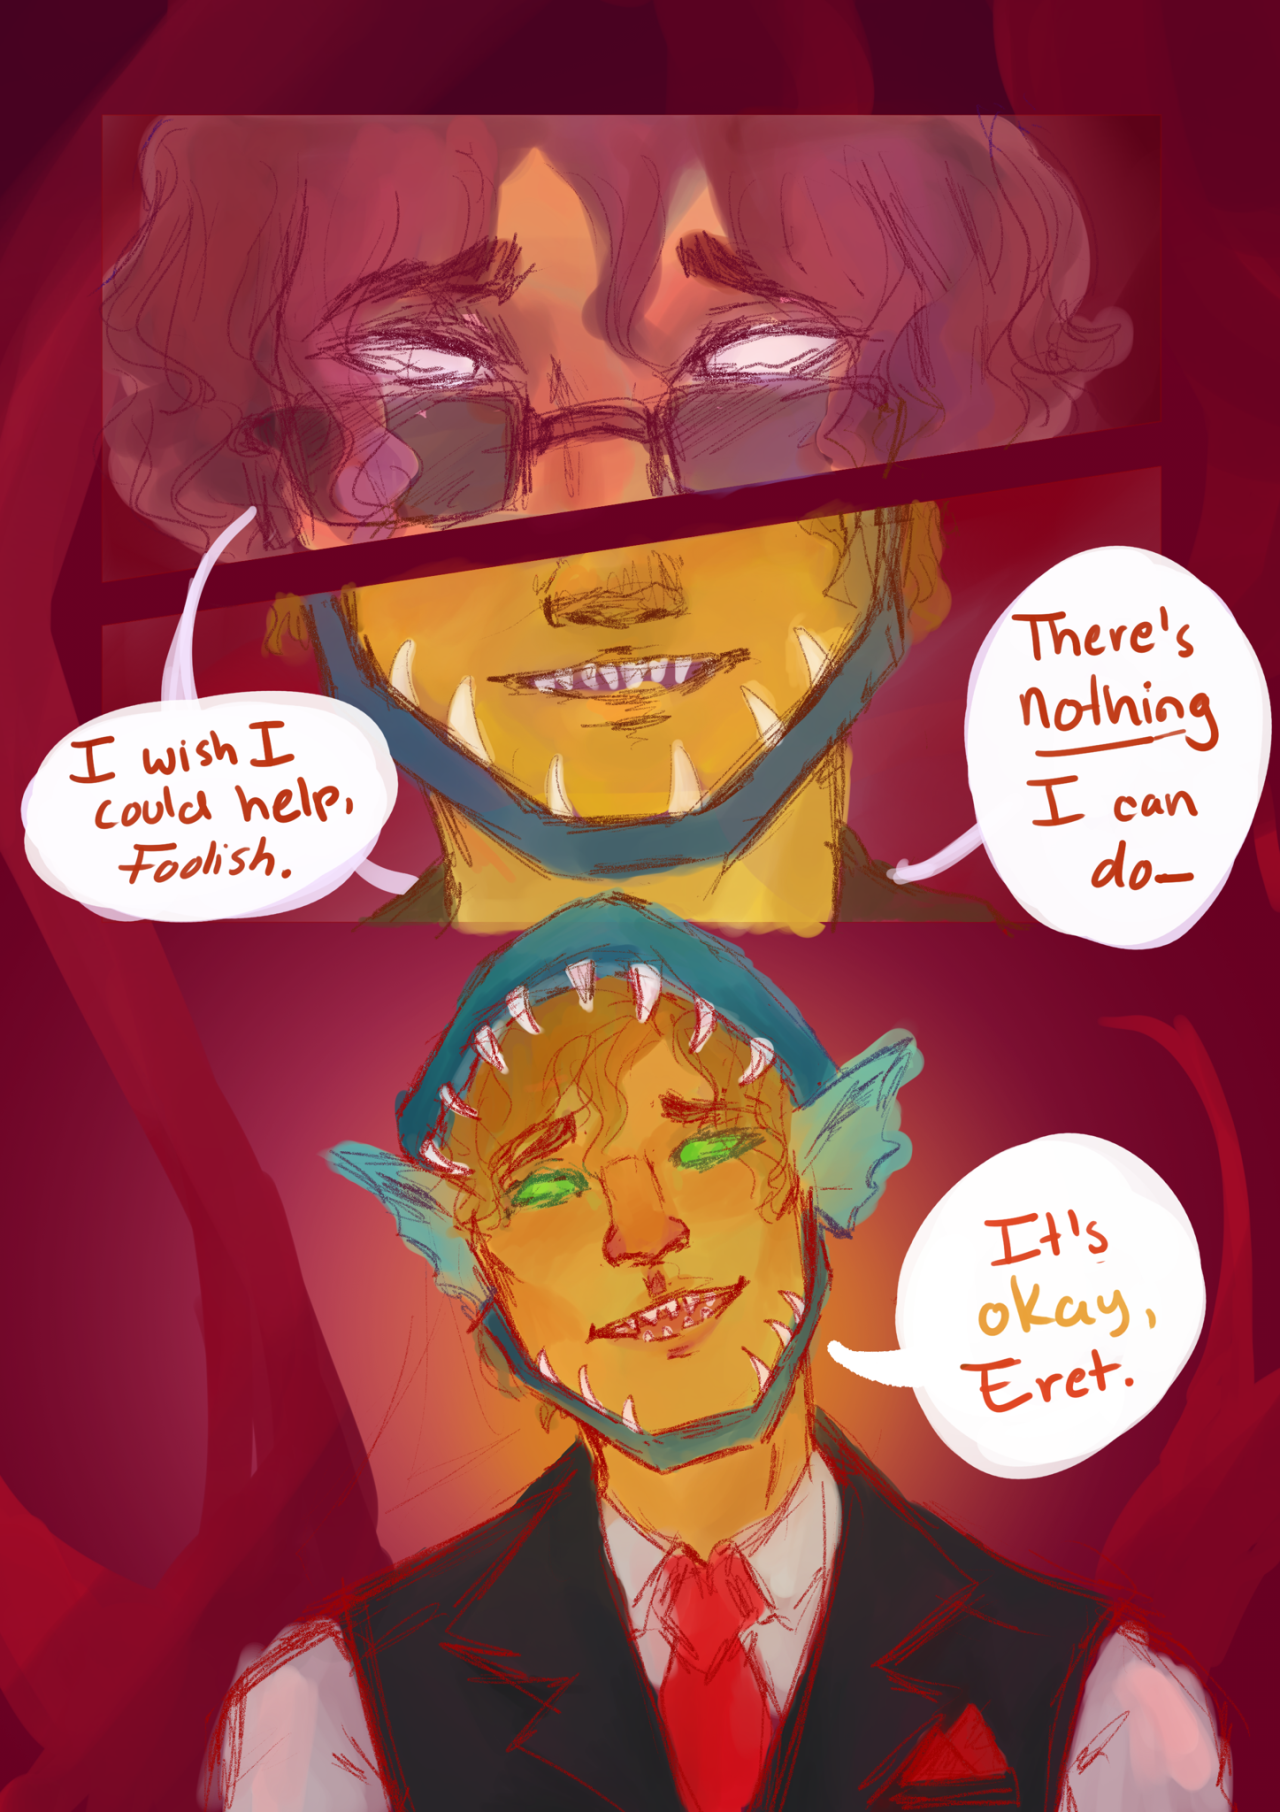 A comic of Foolish's sacrifice. The first panel is a close up of Eret's blank white eyes, peaking over their sunglasses. They say, 'I wish I could help, Foolish.' The second panel is a close up of Foolish's smiling mouth, showing off his shark teeth. He says, 'There's nothing I can do--'. The third panel is of Foolish, smiling bittersweetly, awaiting death. He says, 'It's okay, Eret.'